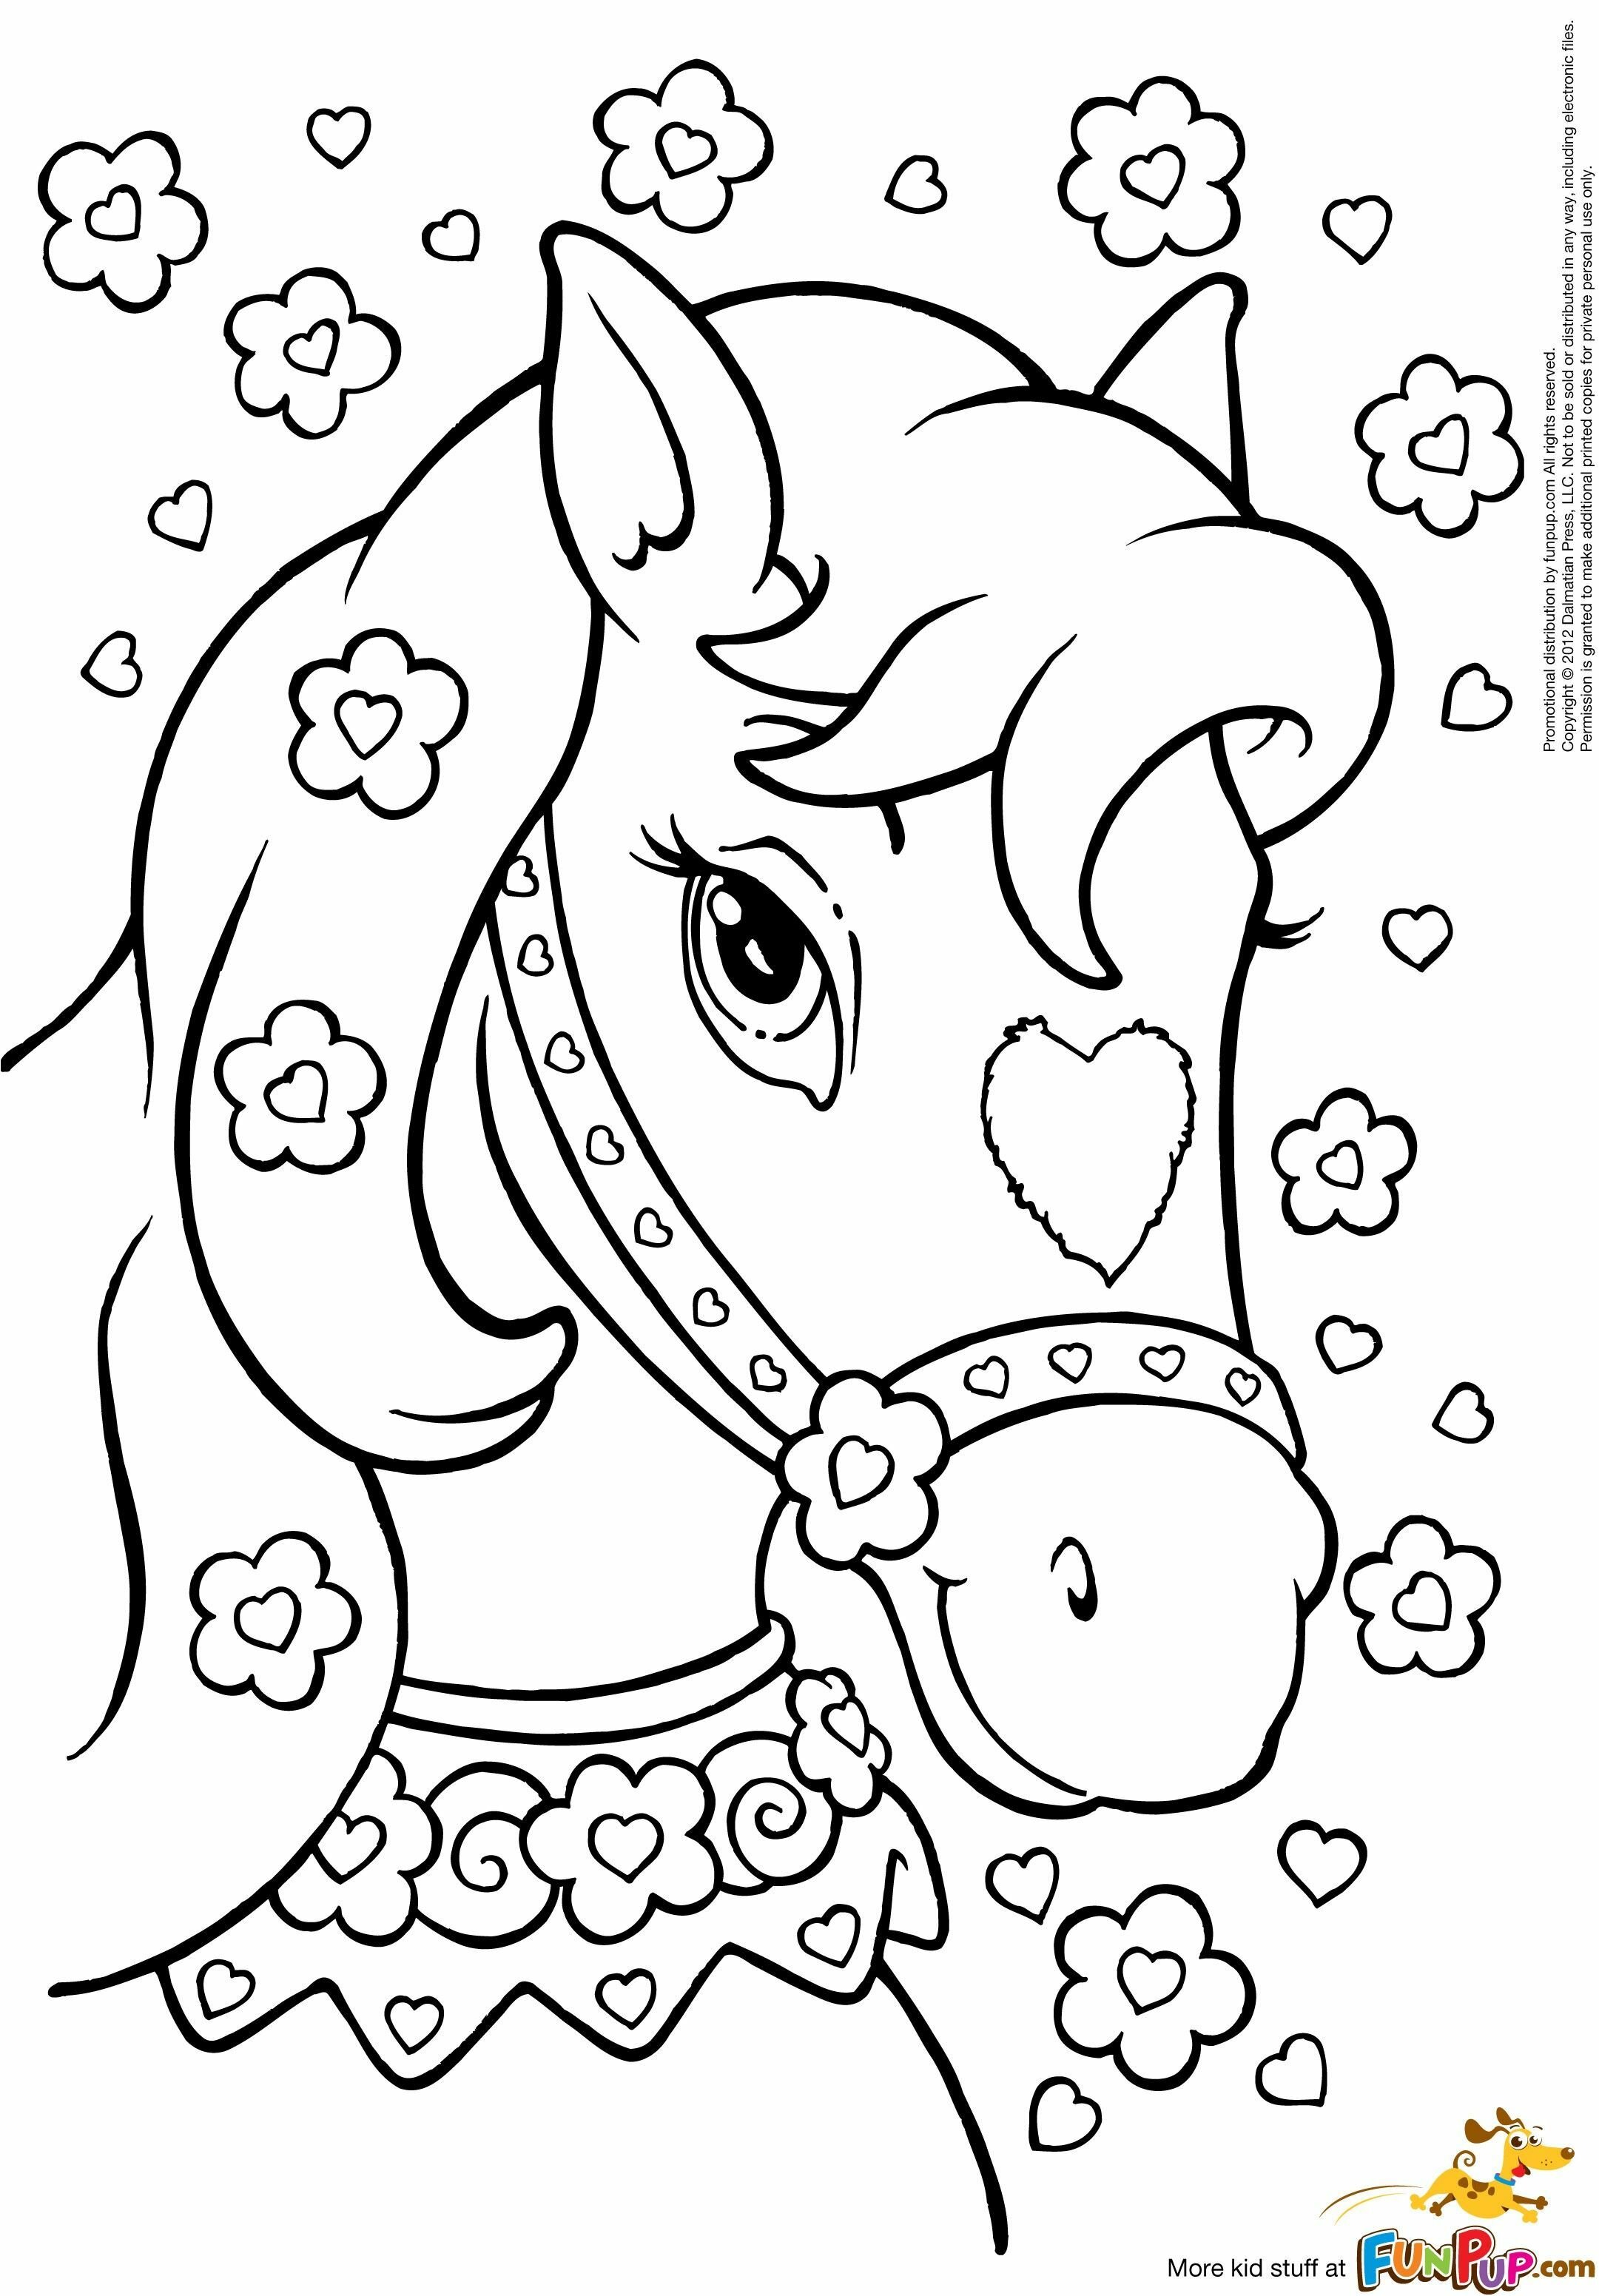 sensational printable princess coloring pages Coloring Pages for Kids kids stylish architecture – free printable coloring pages for children